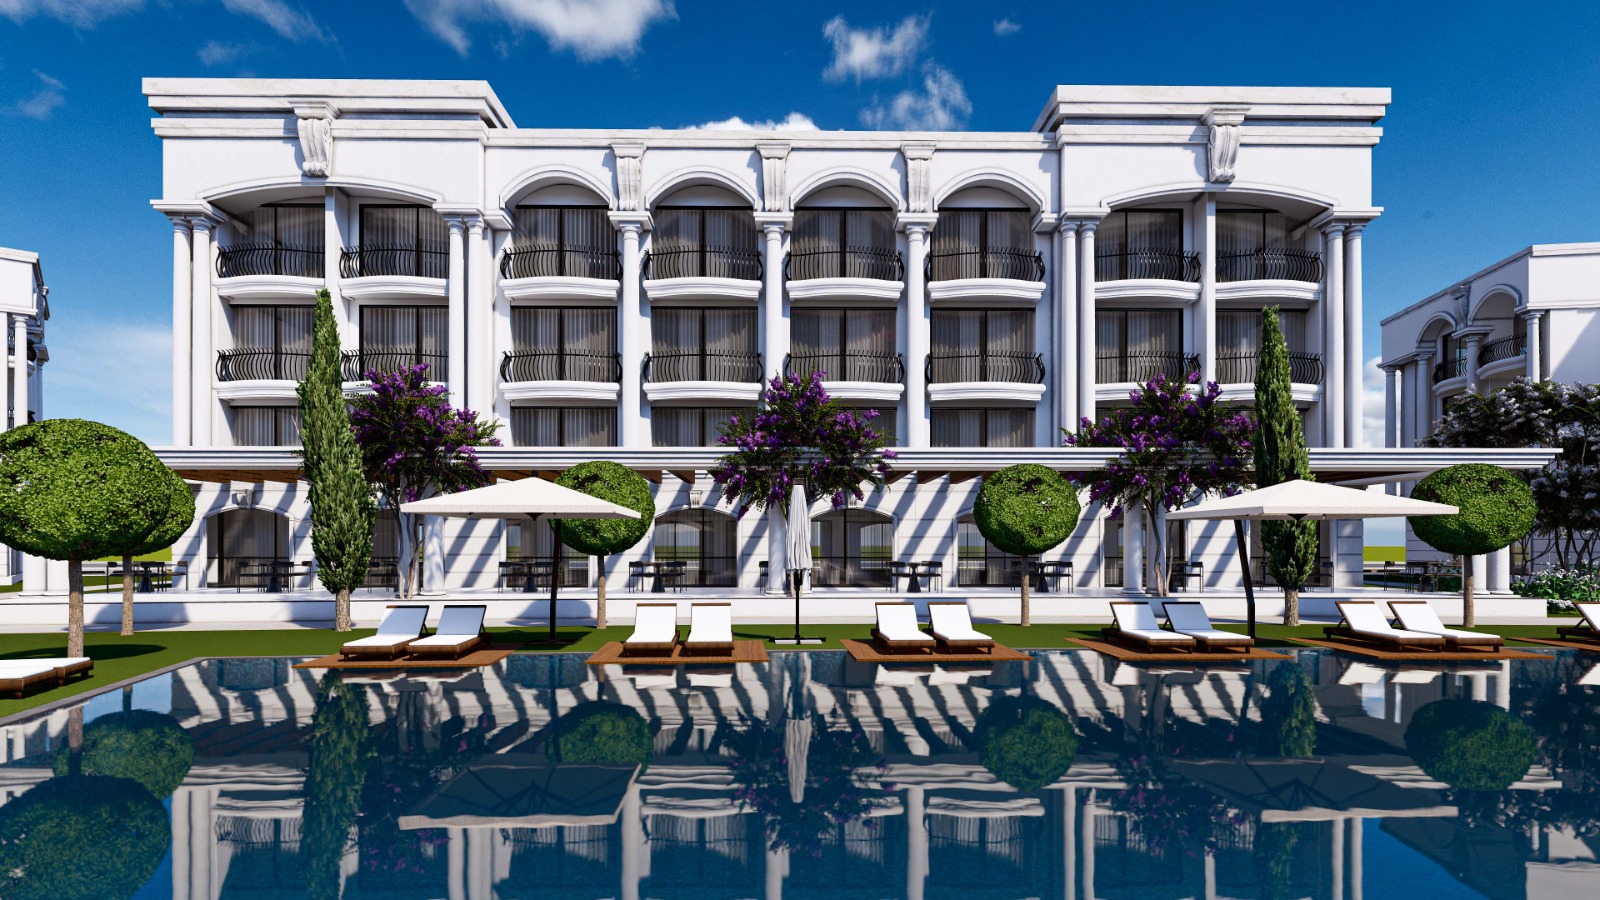 Hotel Concept Apartments in Cyprus Slide Image 1